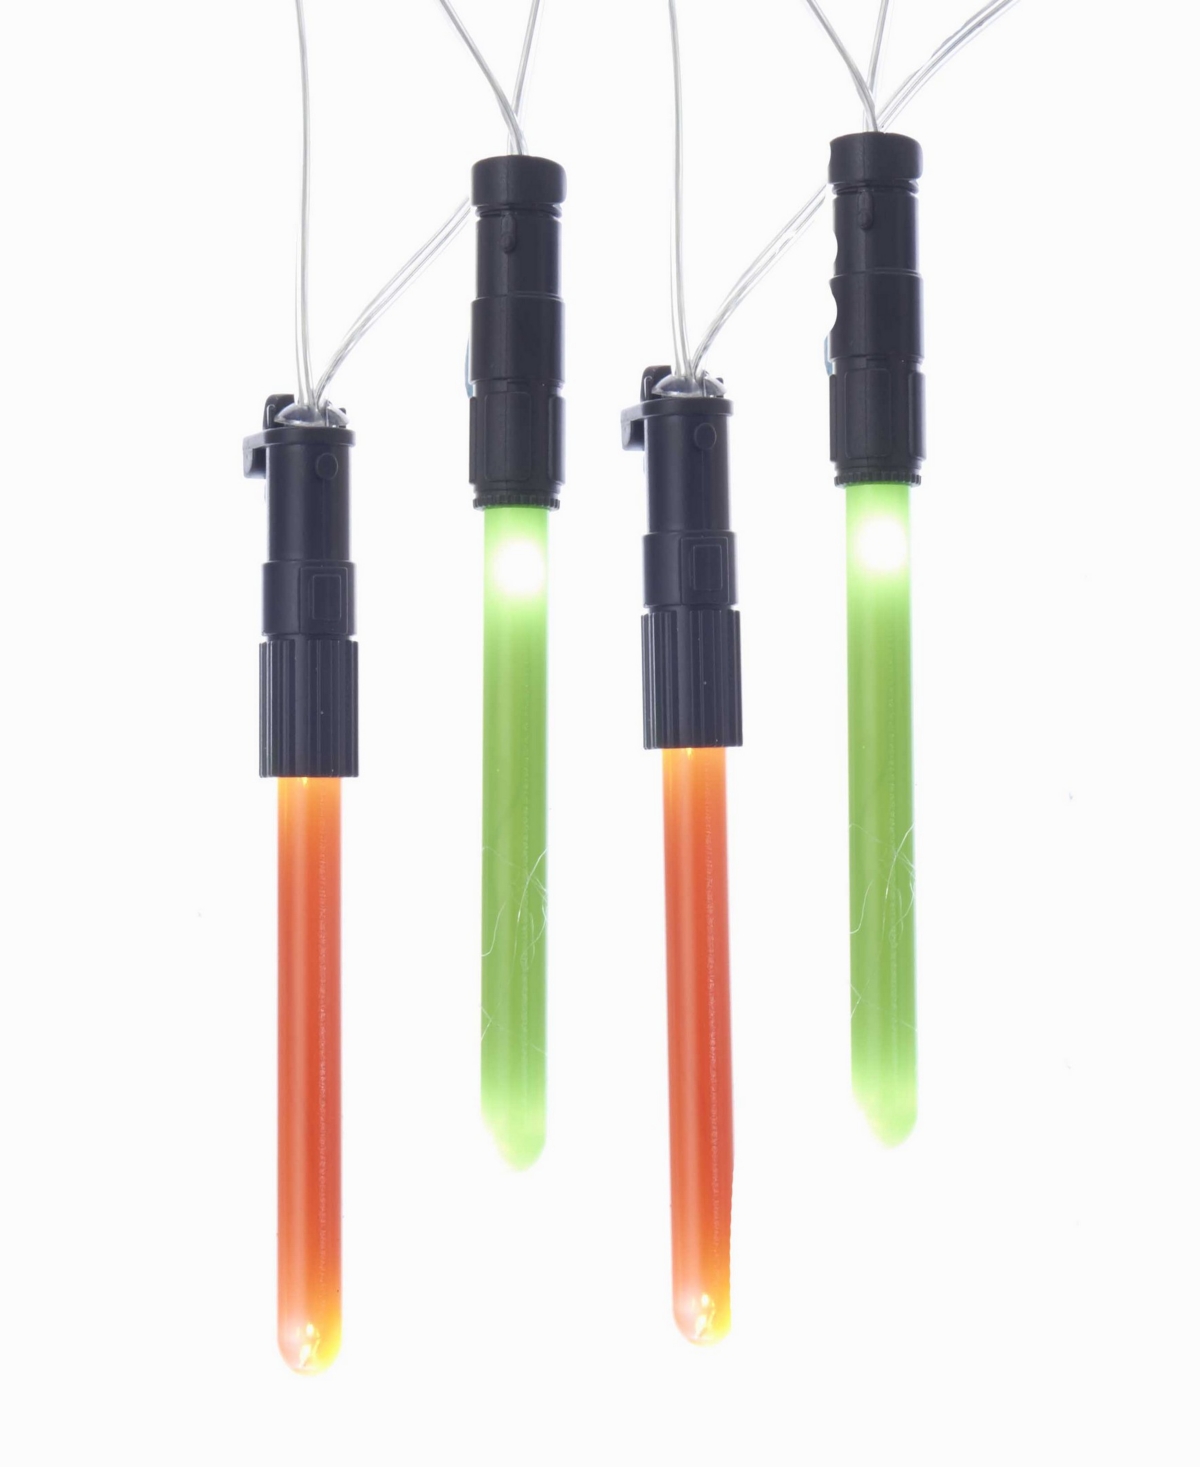 Kurt Adler Star Wars Light Sabers Battery Operated 40 Lights With 20 Light Sabers In Multicolored